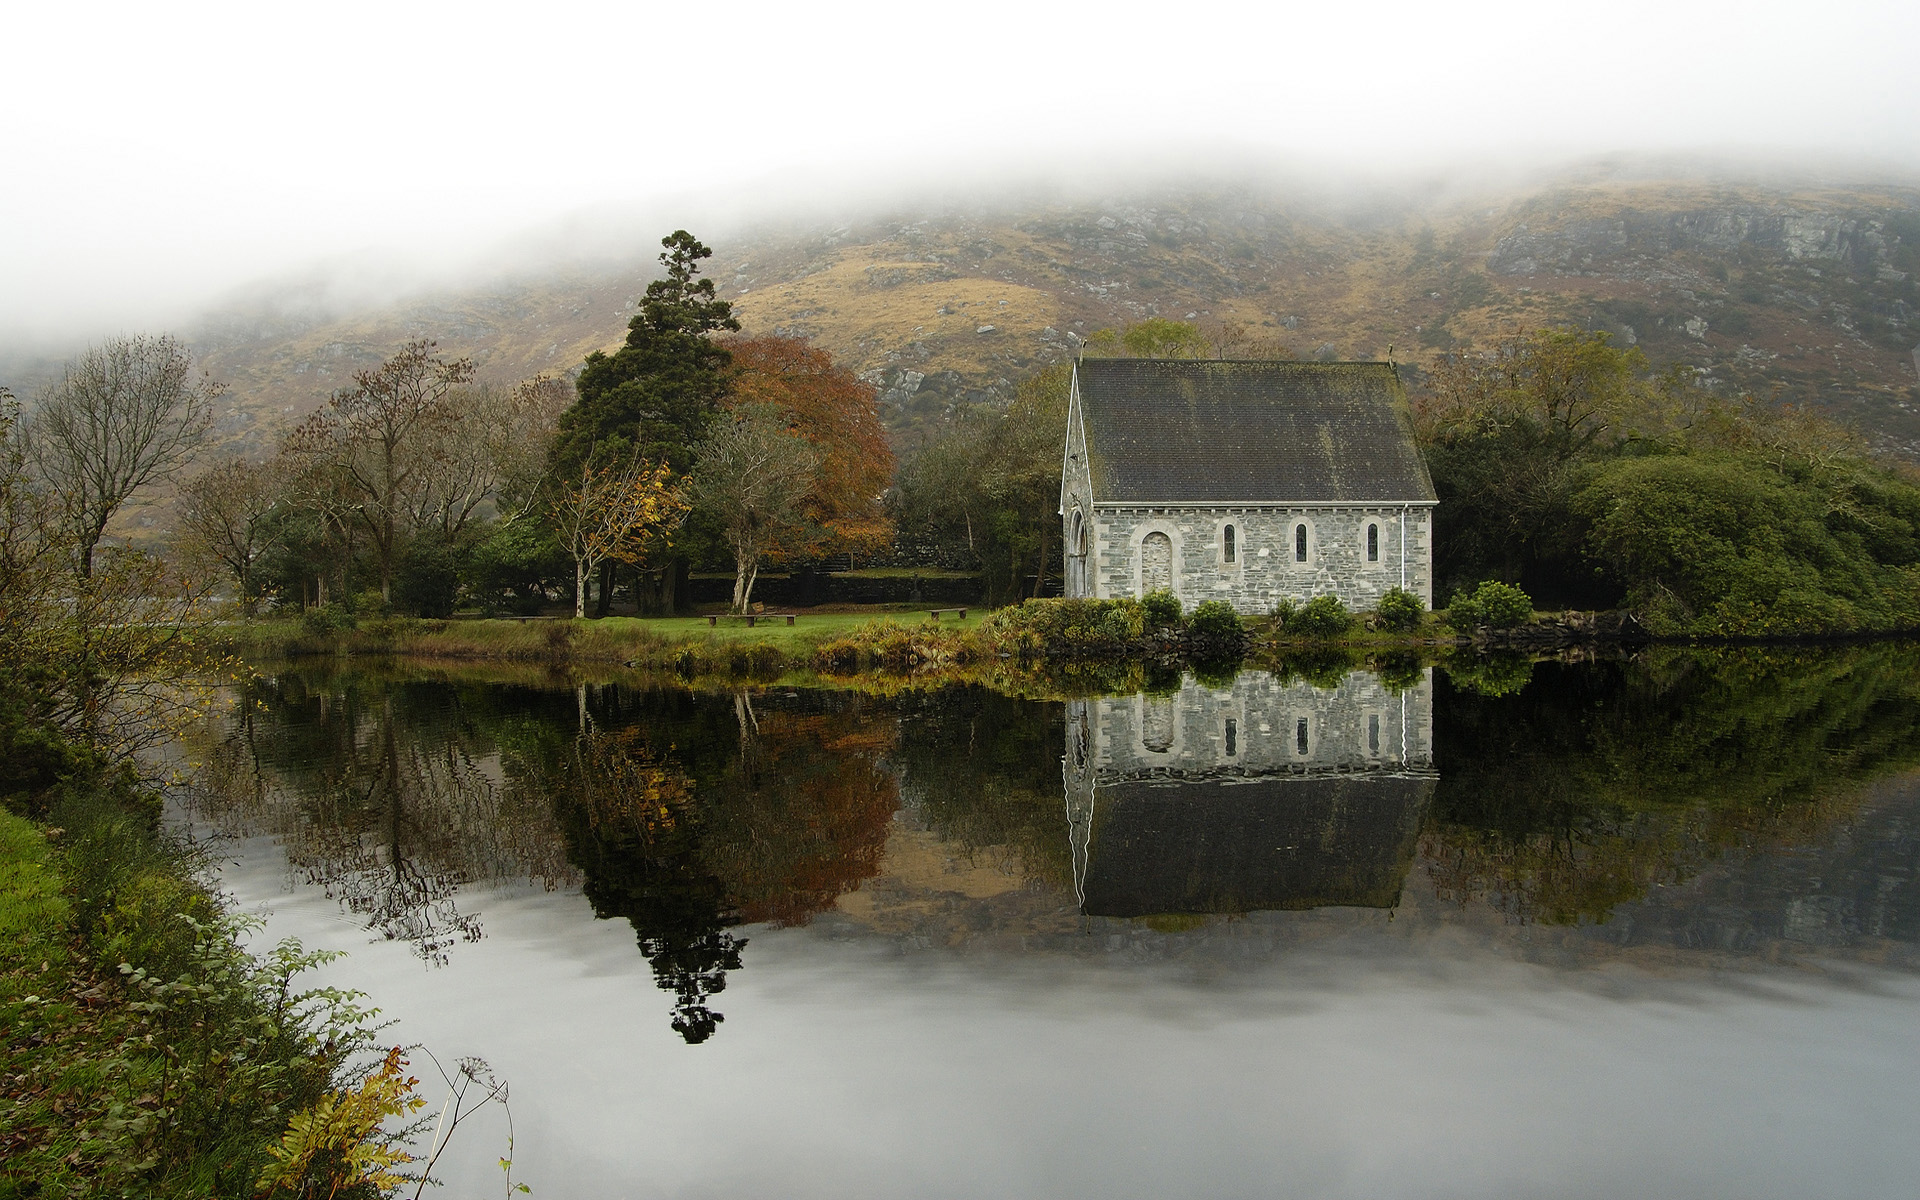 Gougane Barra Wallpaper And Image Pictures Photos